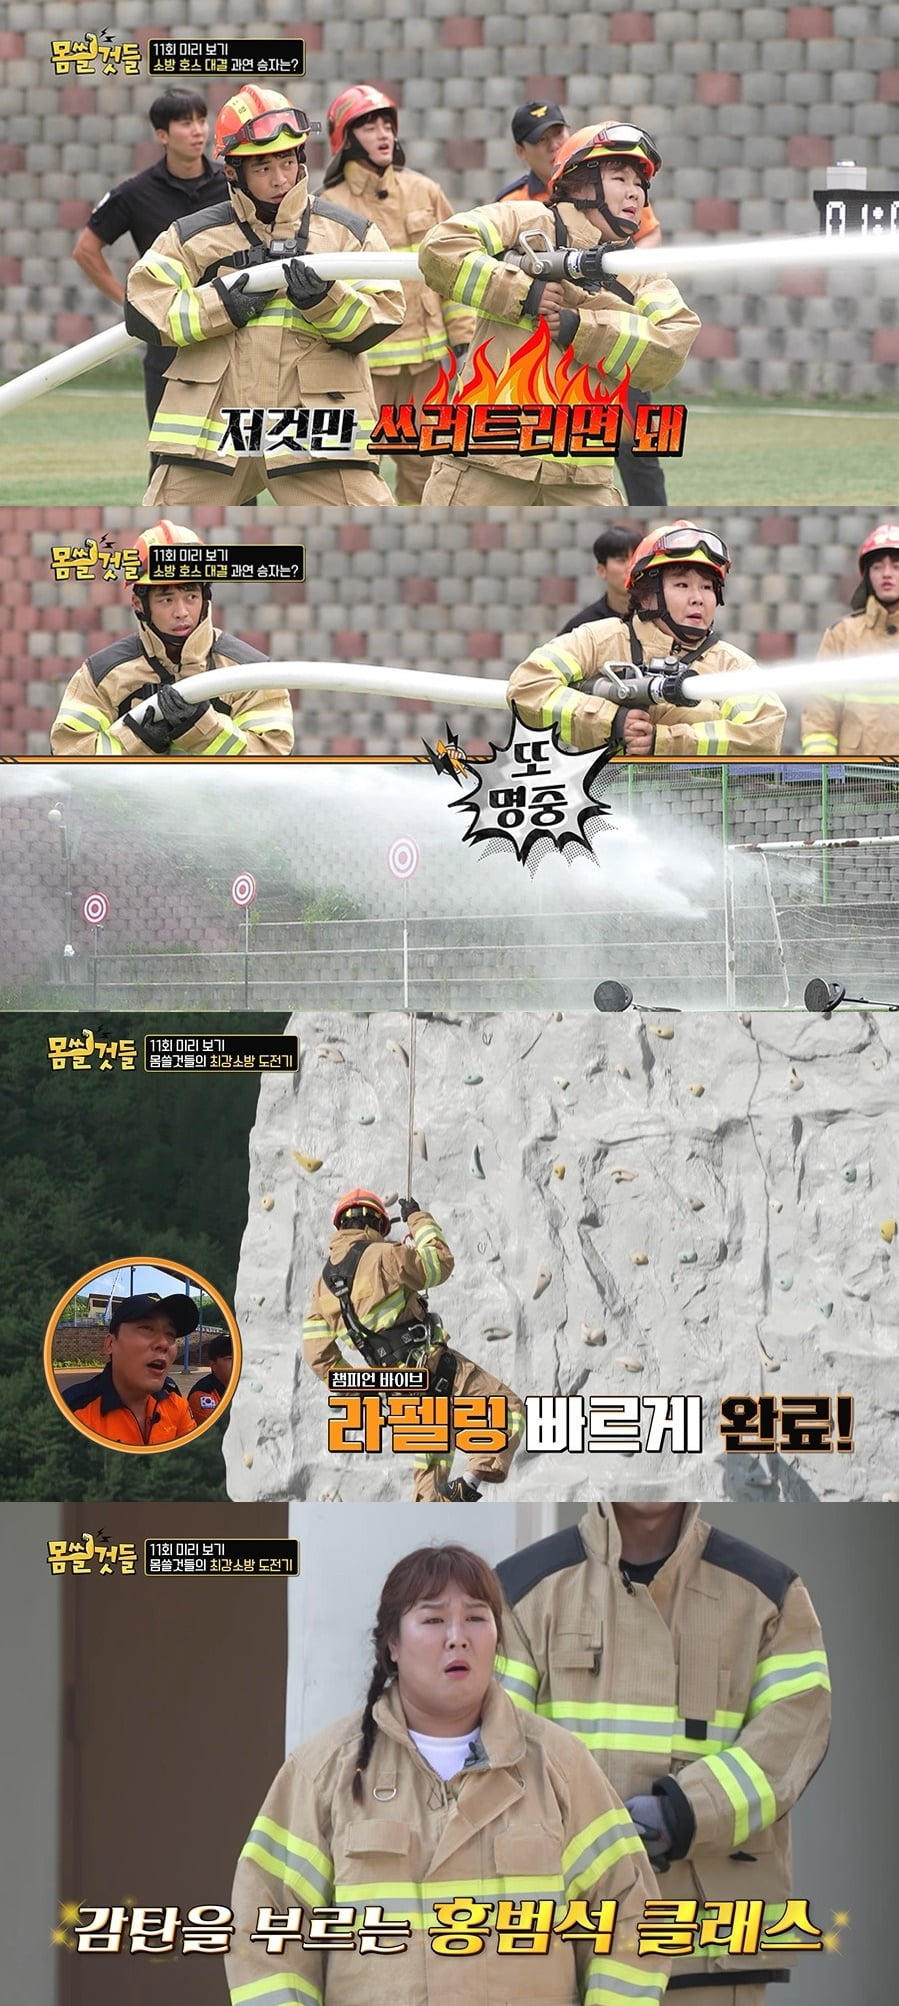 Min-kyung Kim, can handle heavy fire hoses with ease